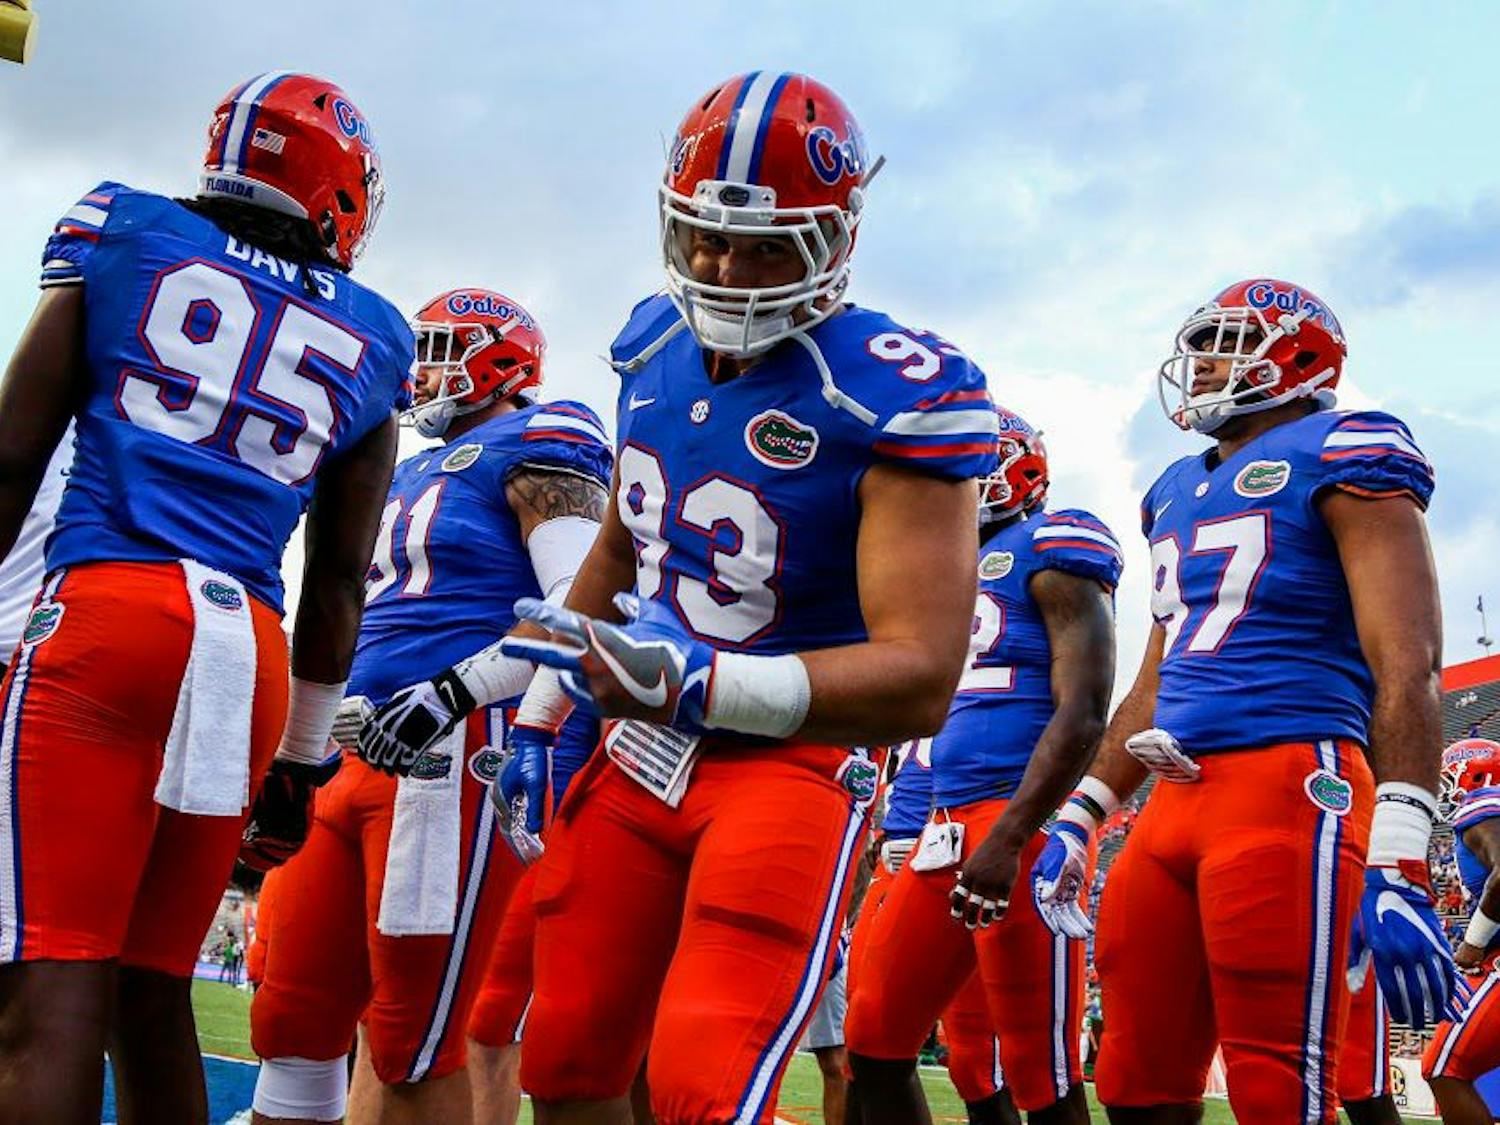 UF defensive tackle Taven Bryan before Florida's 32-0 win against North Texas on Sept. 17, 2016, at Ben Hill Griffin Stadium.